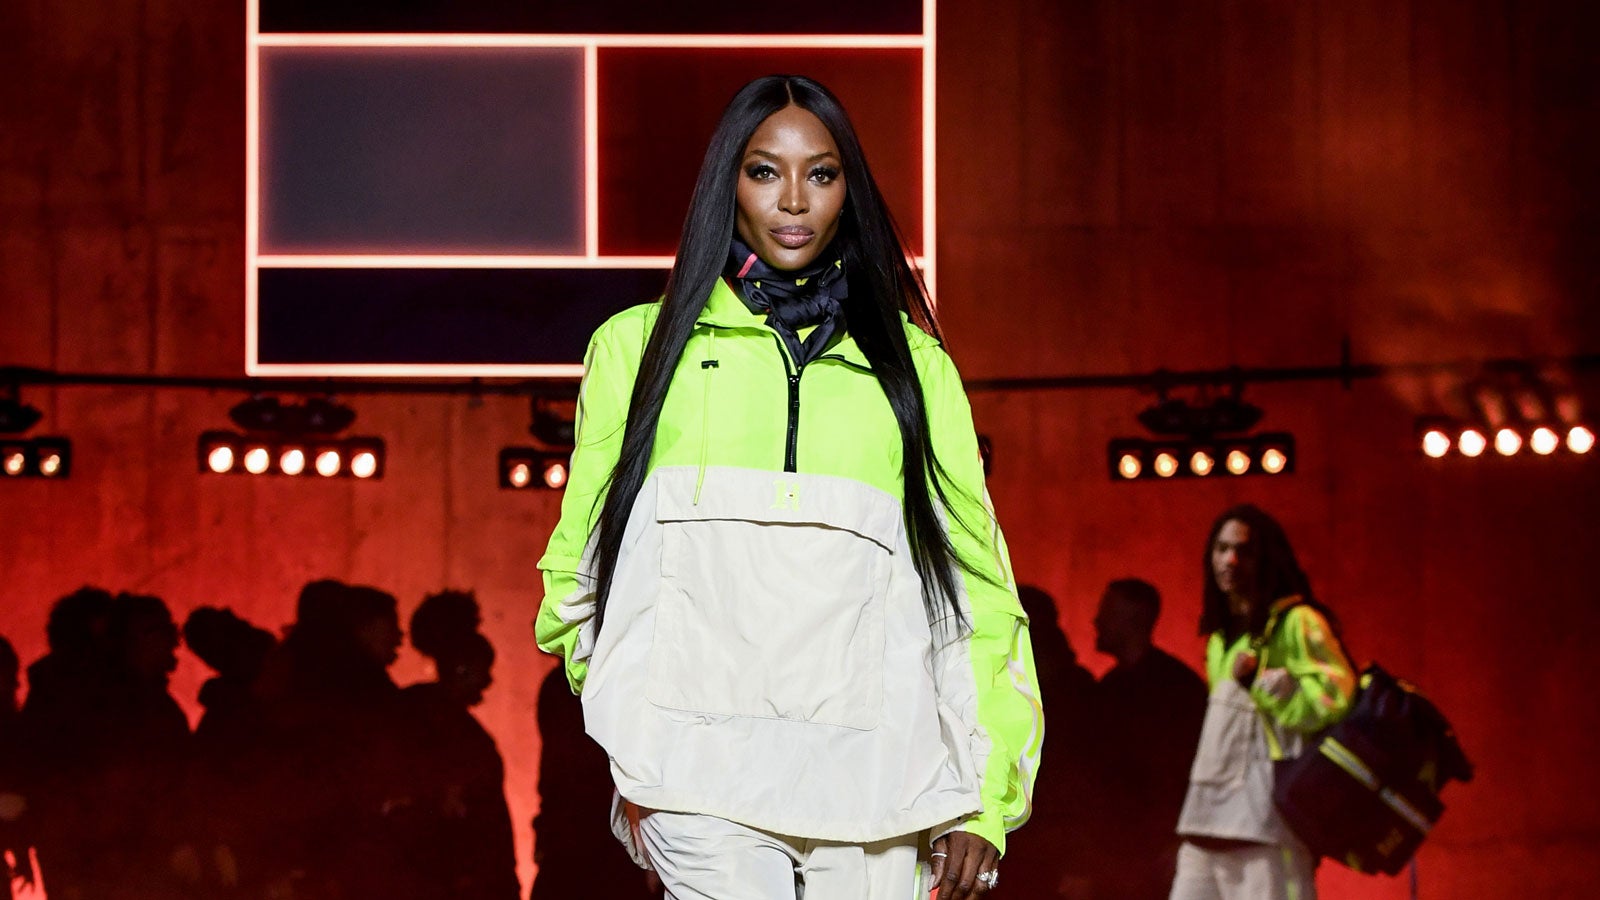 Naomi Campbell Launches Daily Live Stream 'No Filter With Naomi' On YouTube